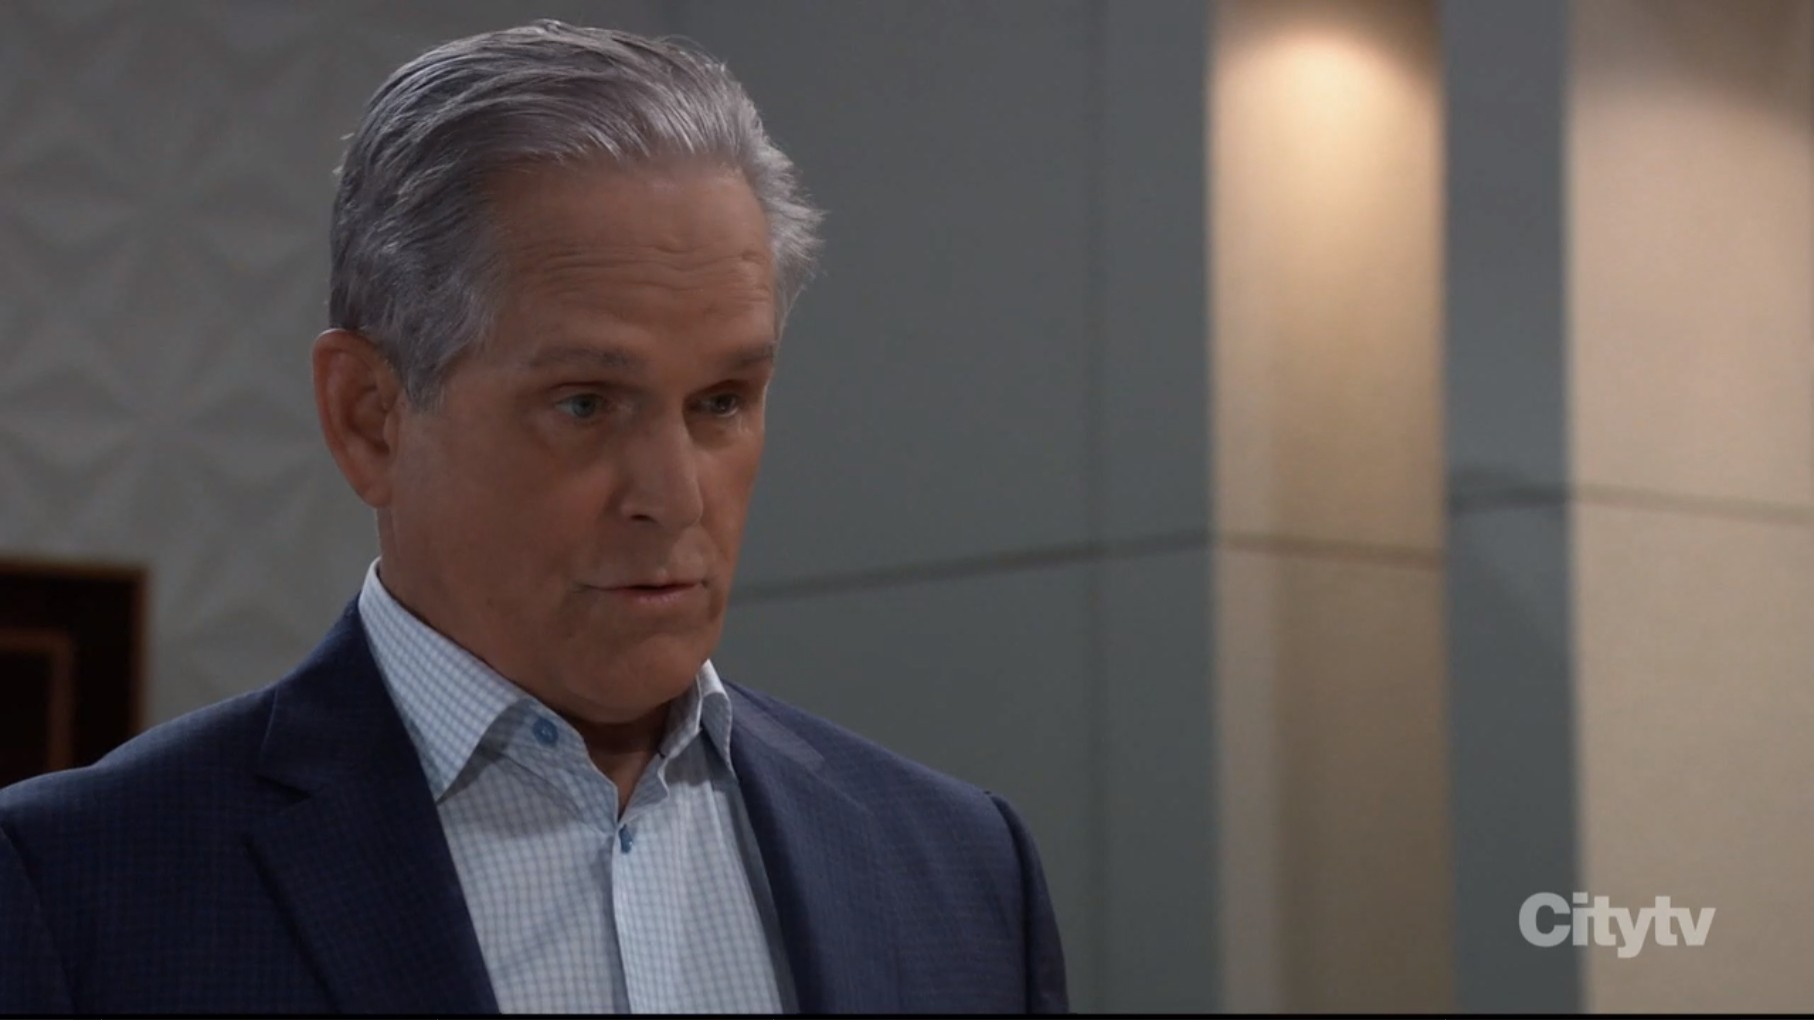 gregory visits with alexis GH recaps today SoapsSpoilers